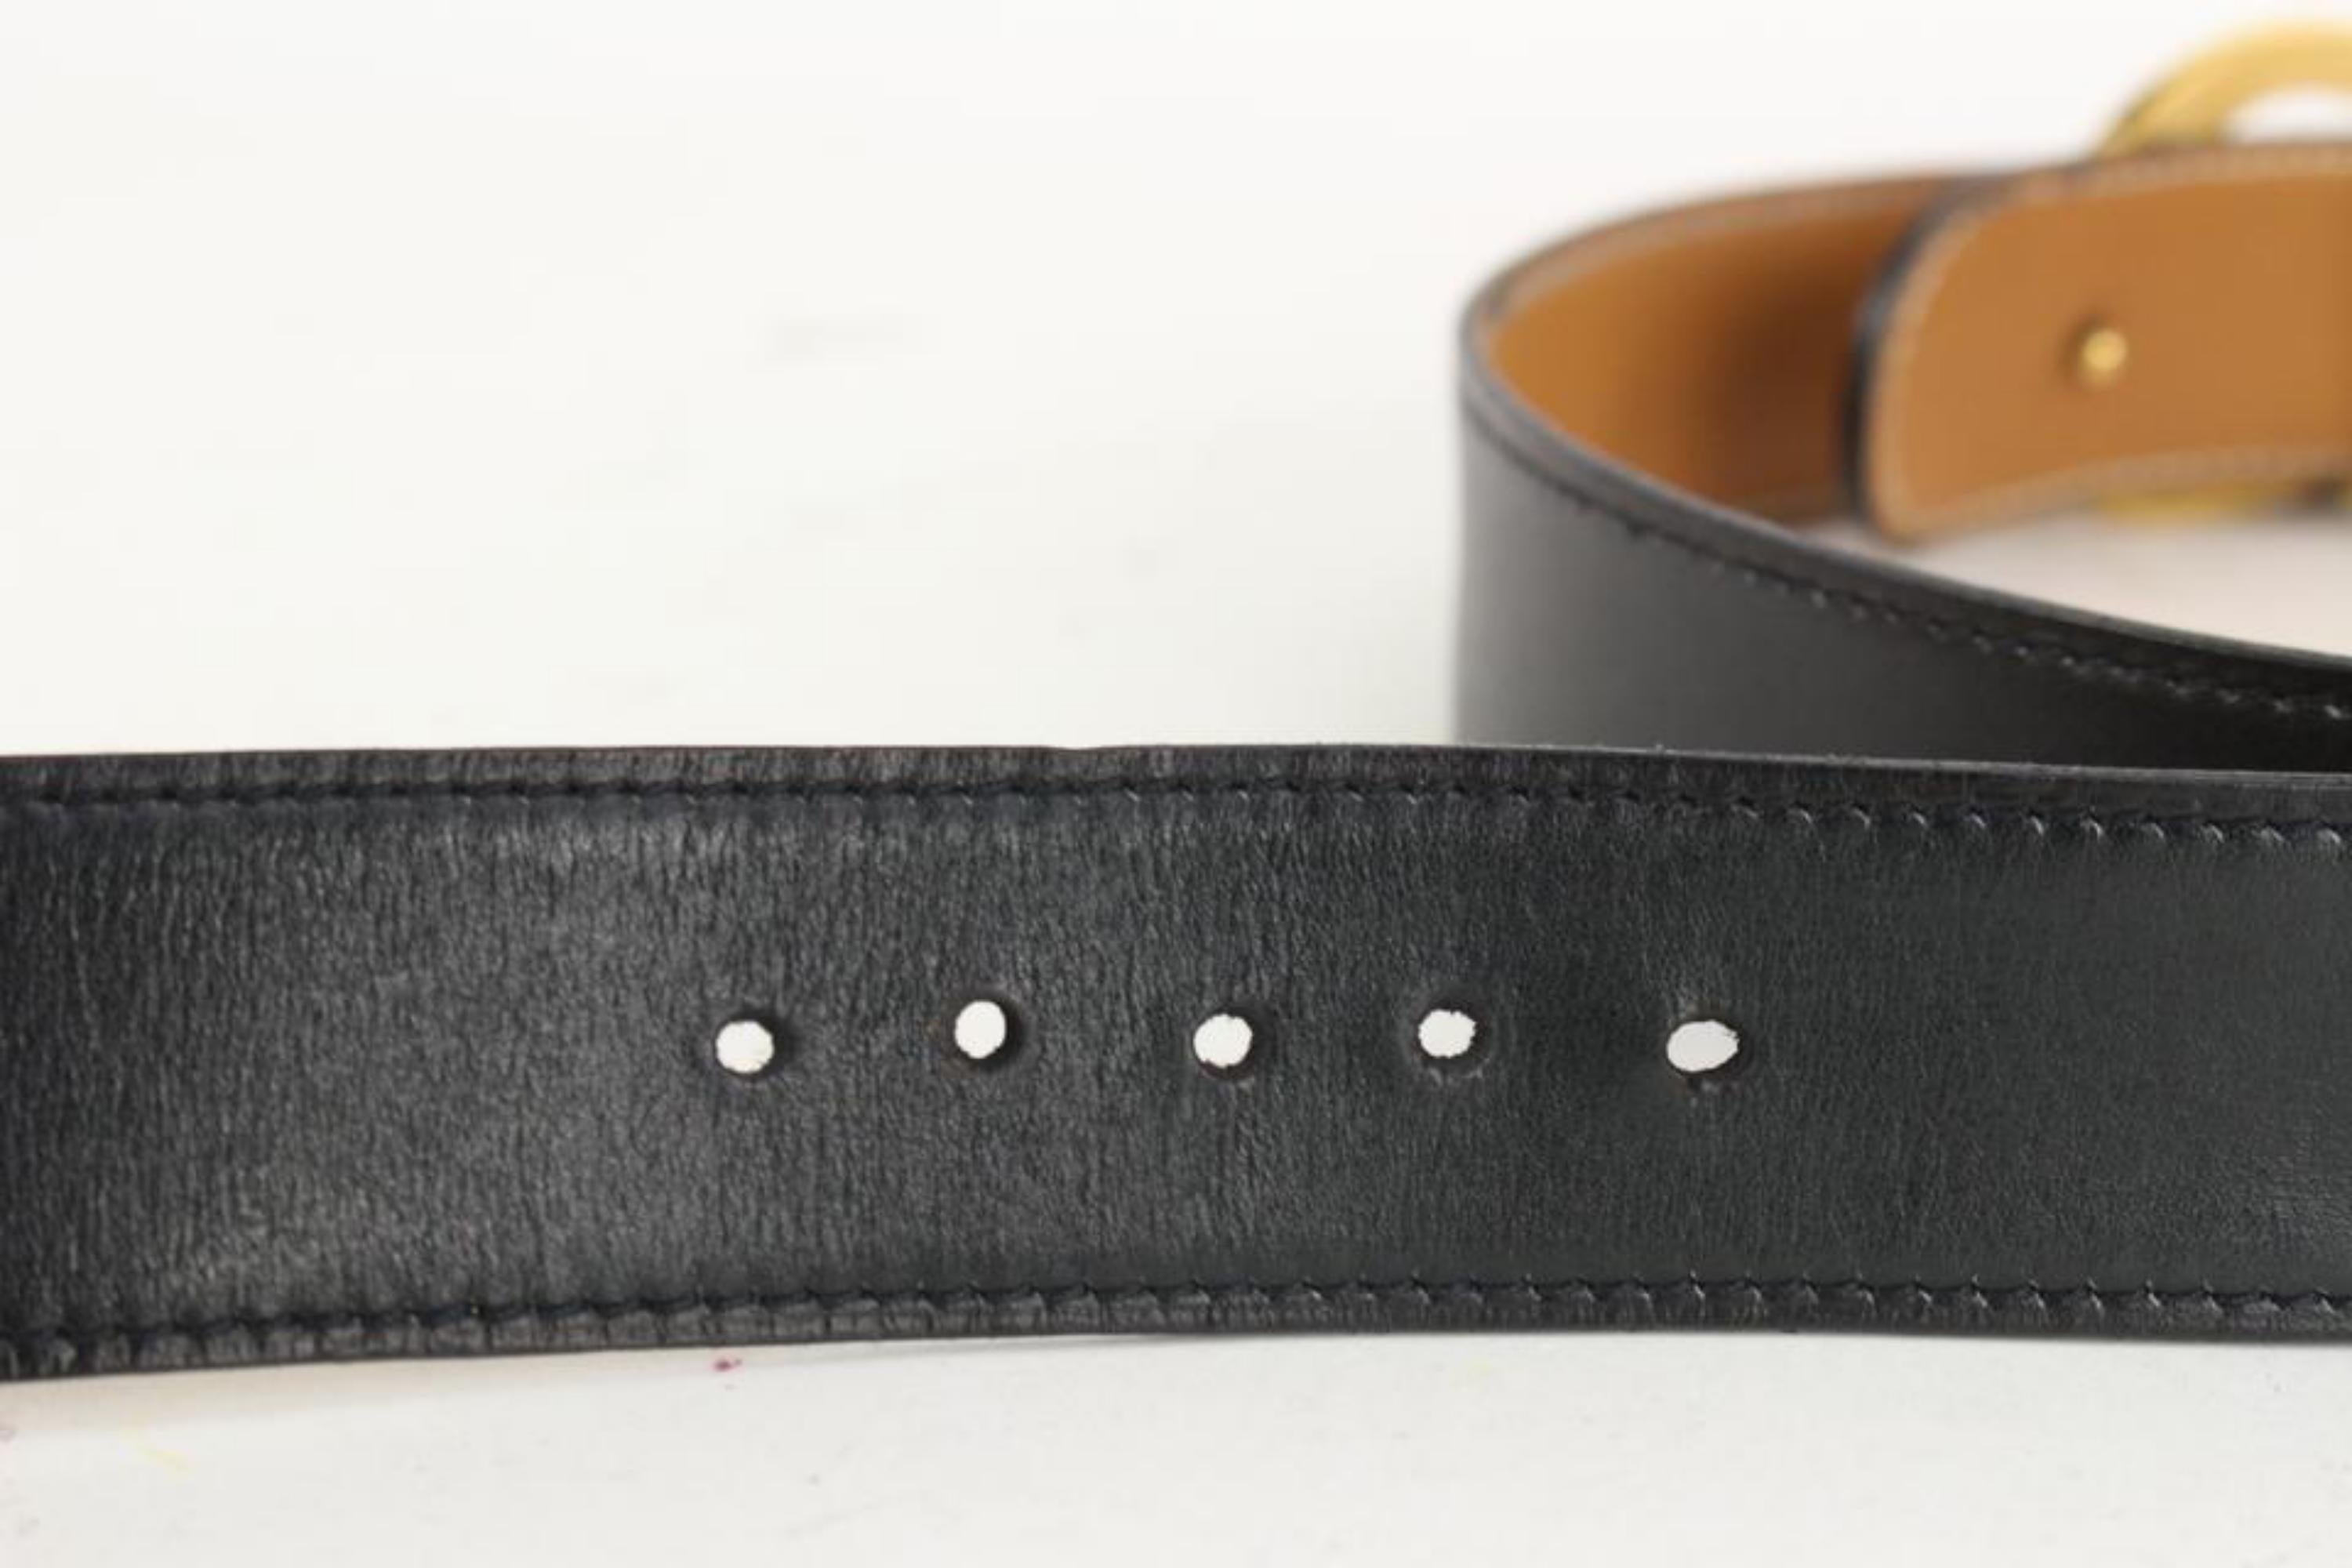 Hermès Black x Brown Leather Reversible Horse Logo Belt Kit 923her11 In Fair Condition In Dix hills, NY